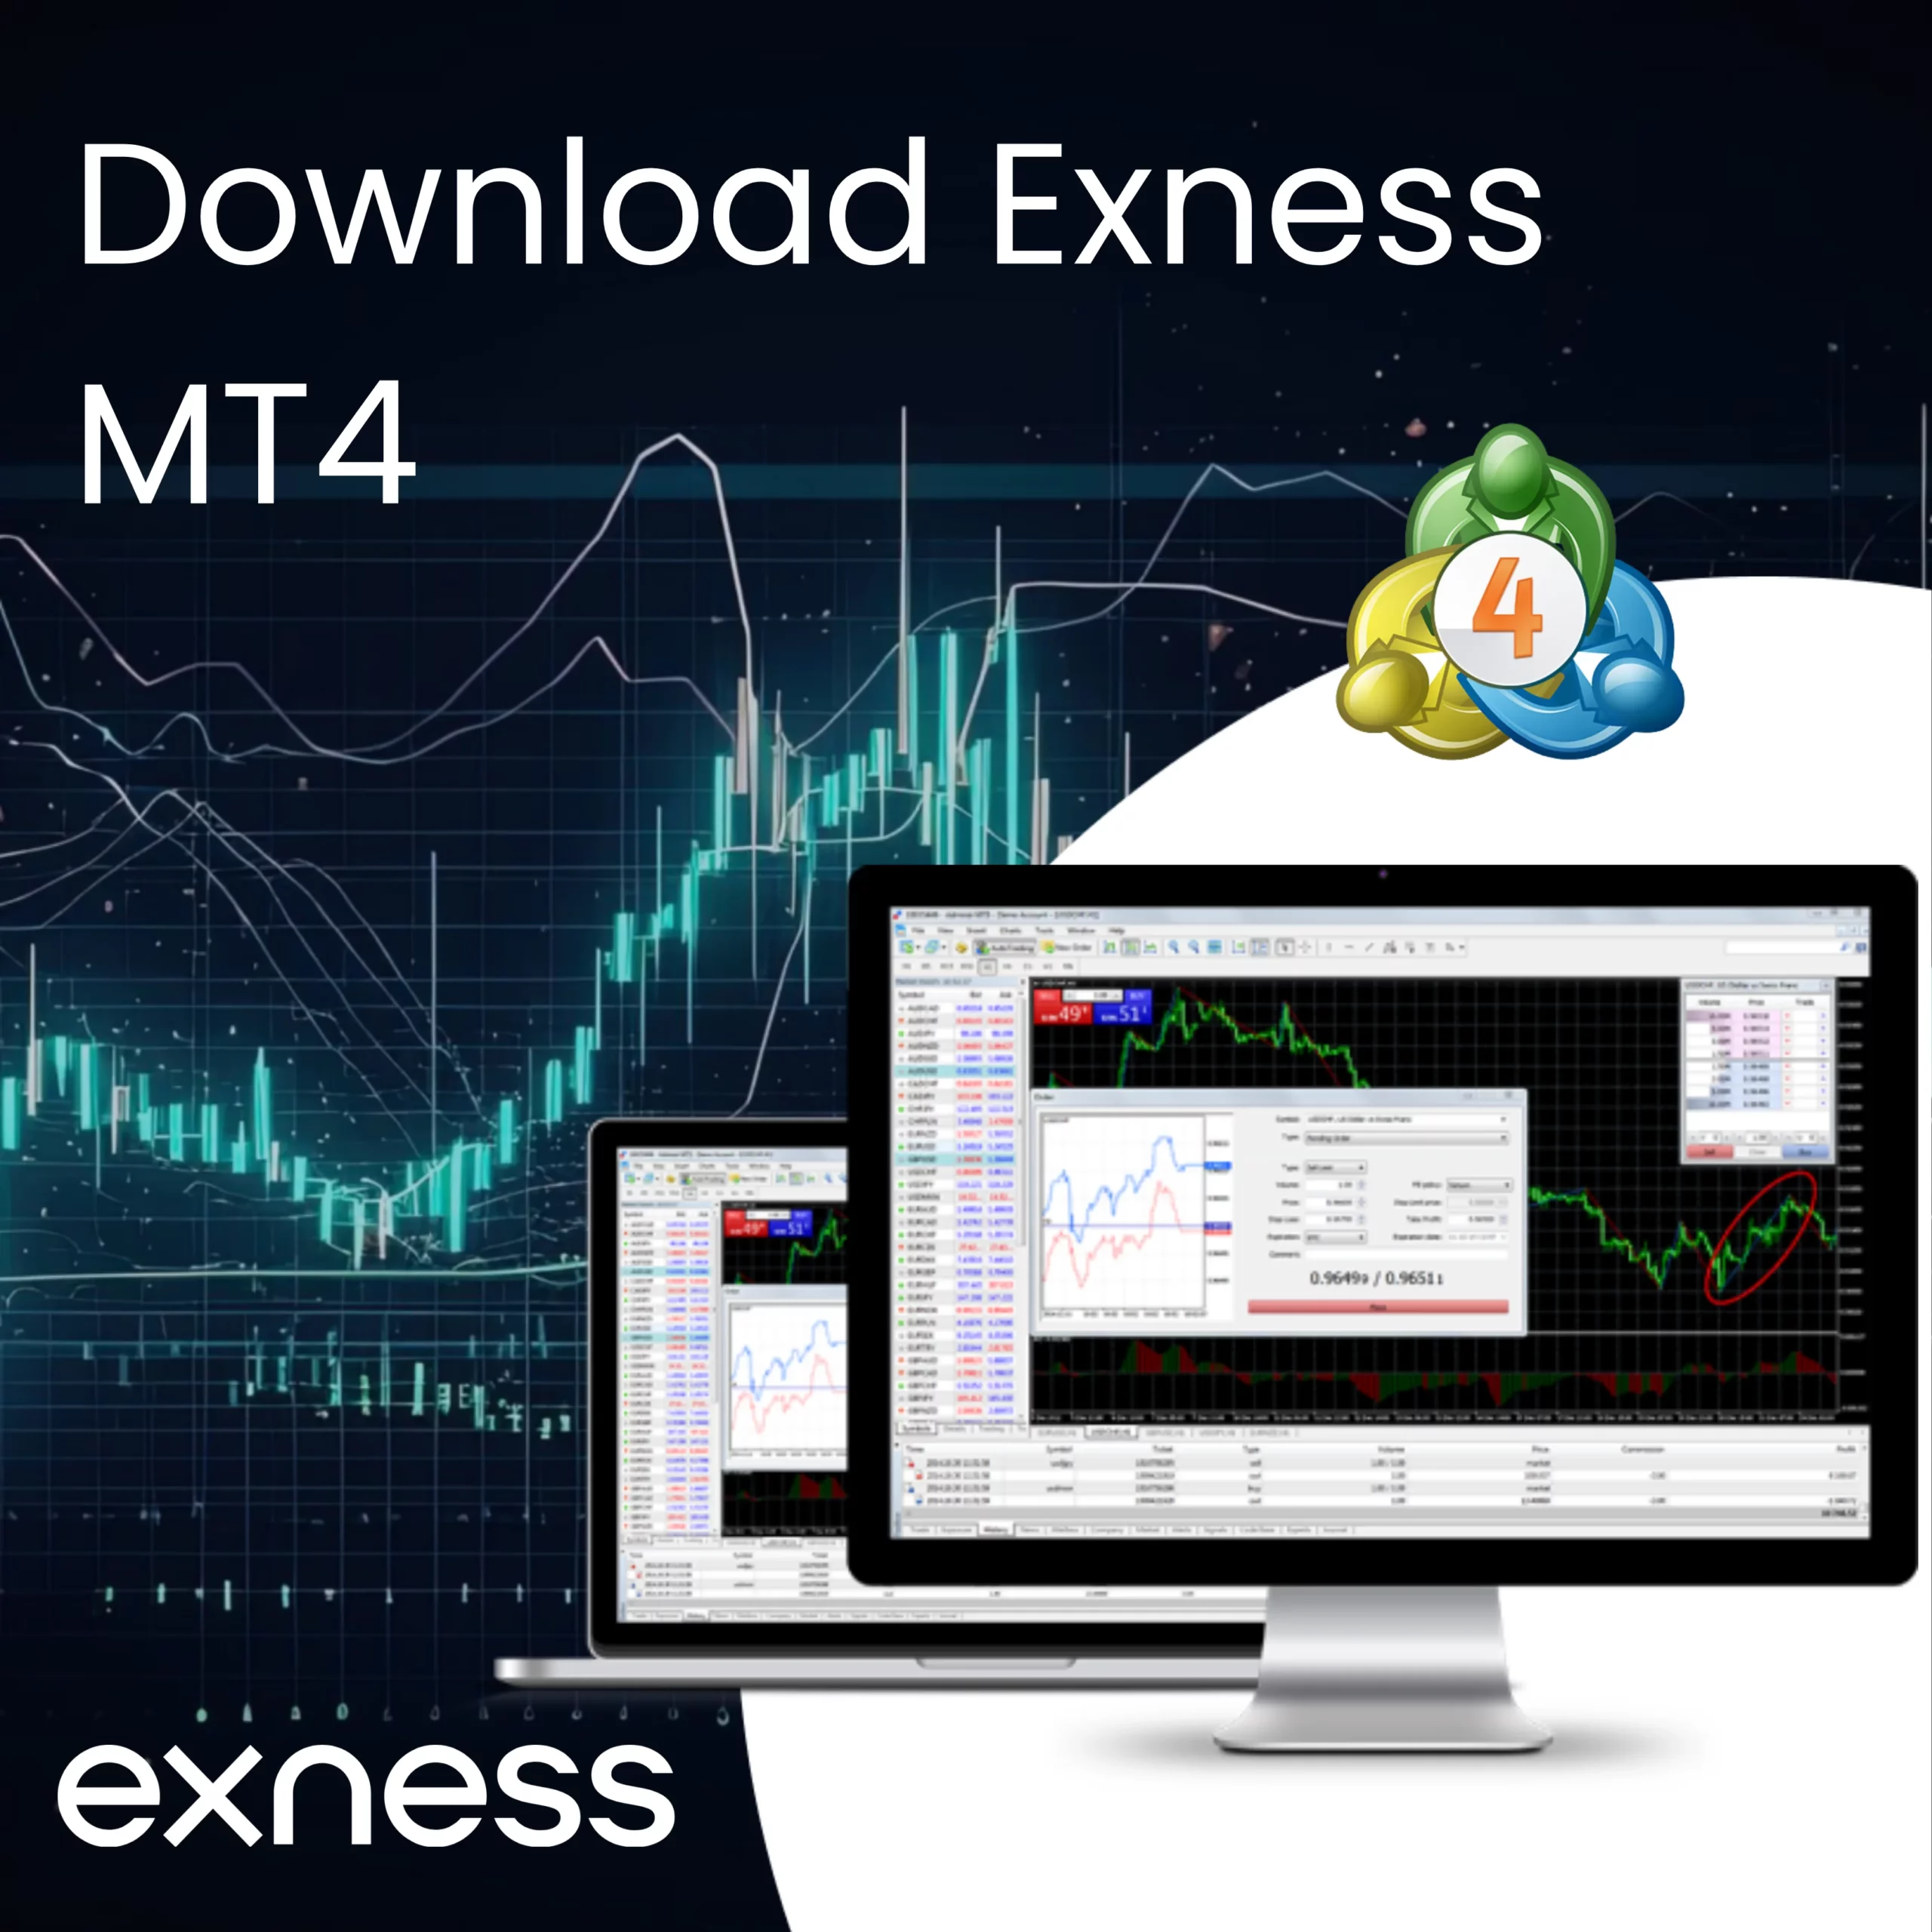 Best Make Download Exness App You Will Read in 2021